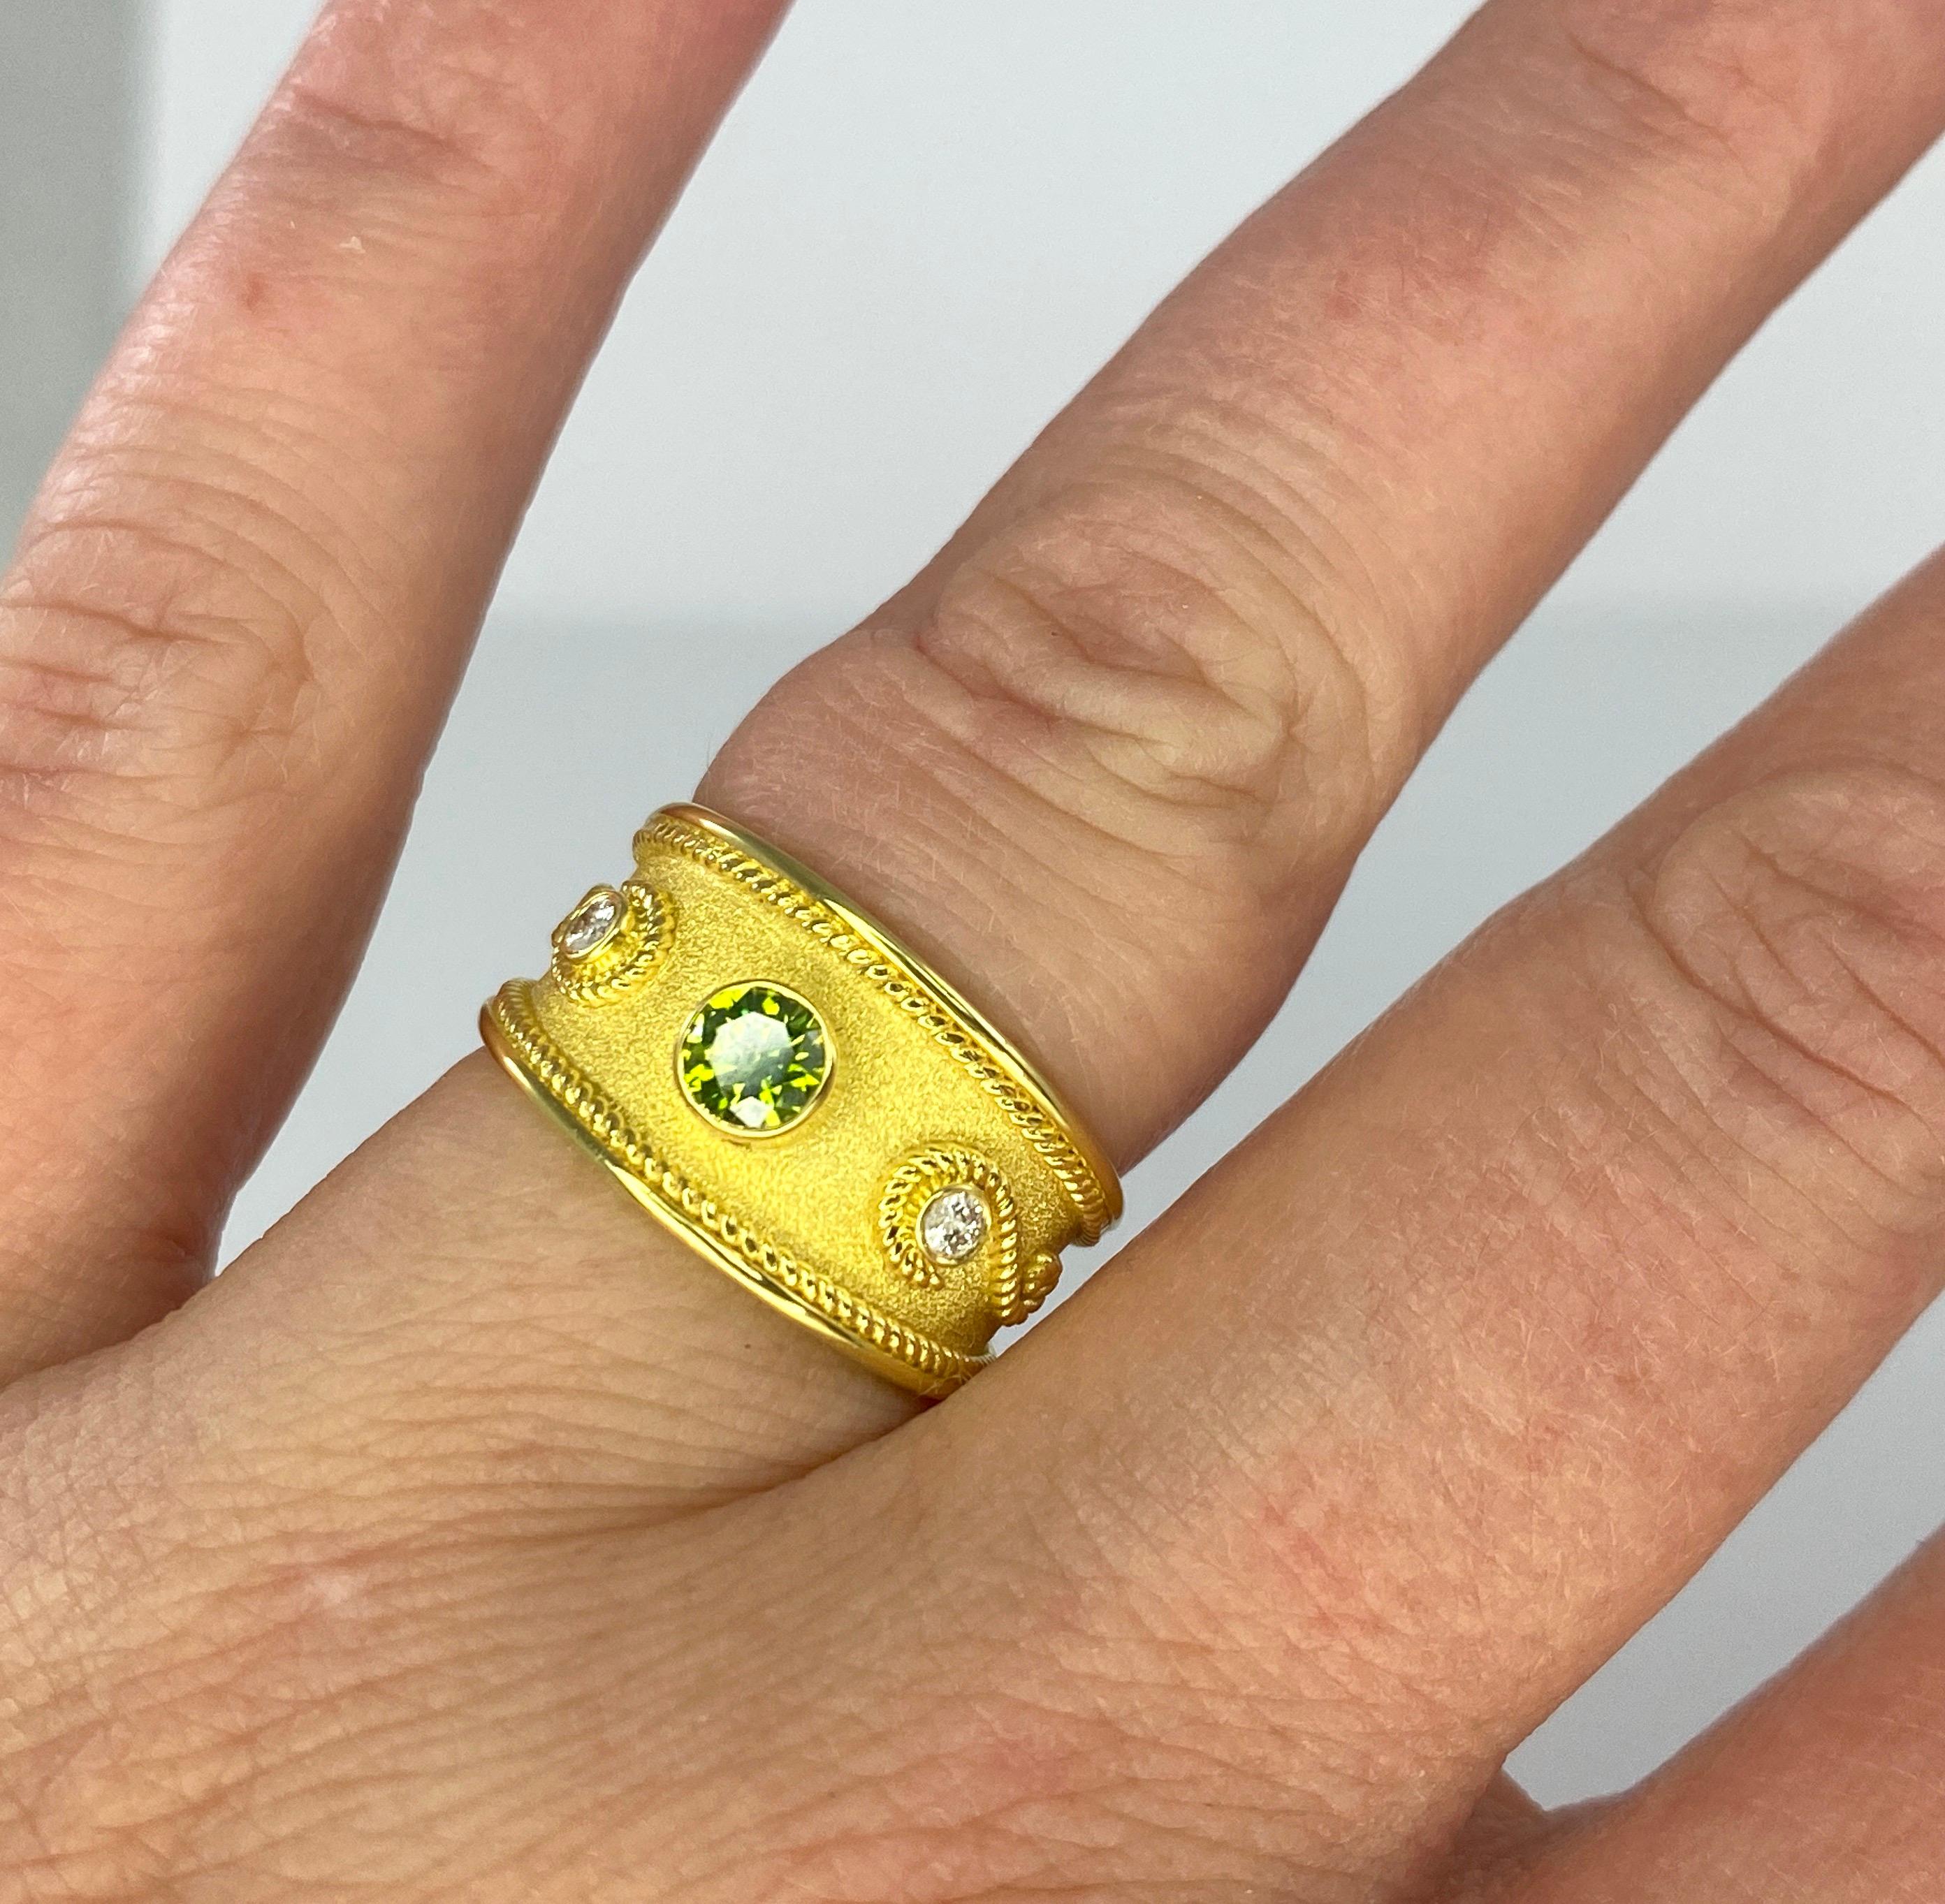 S.Georgios designer graduated ring handmade from solid 18 Karat Yellow Gold. The ring is microscopically decorated with 18 Karat yellow gold twisted wires laying against the Byzantine velvet background. The ring features 0.28 Carat Brilliant cut